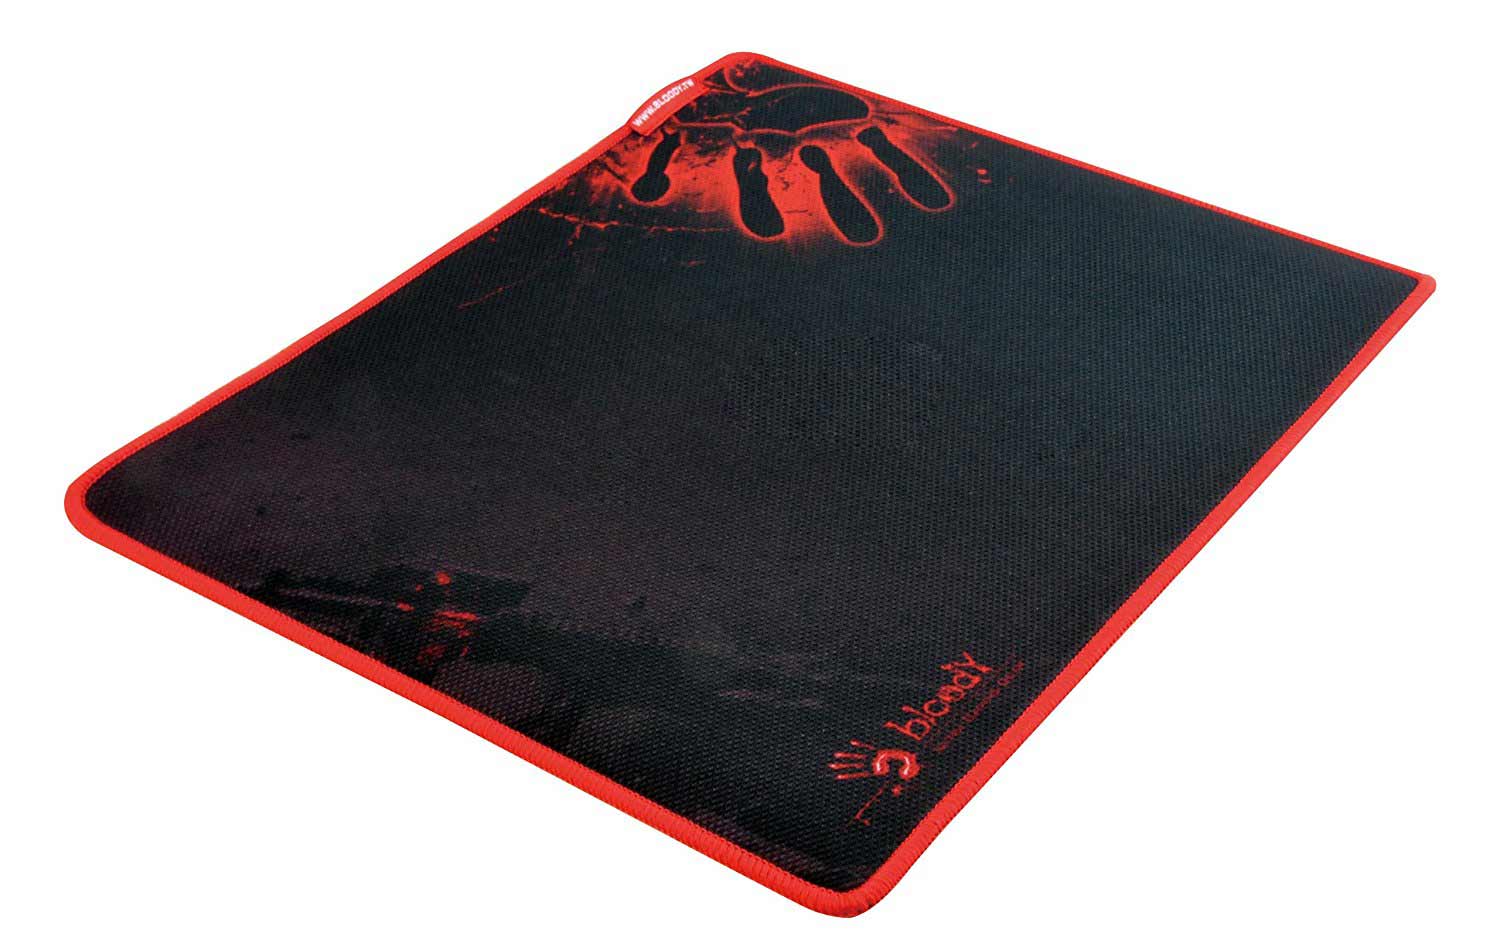 Image result for A4Tech Bloody B-080 Defense Armor Gaming Mouse Pad